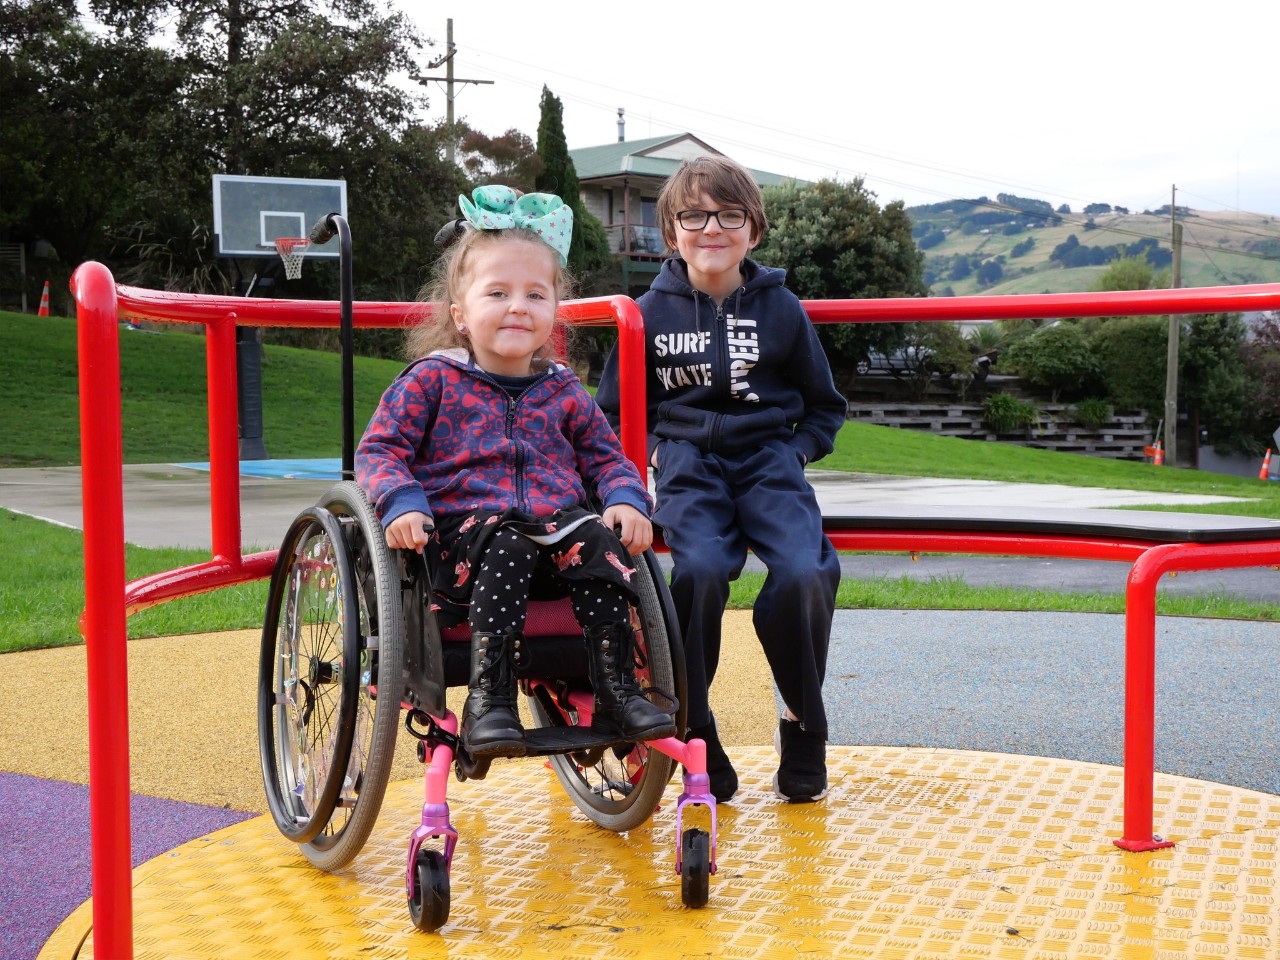 Dunedin kid makes playground more accessible after friend in wheelchair couldn’t play with him